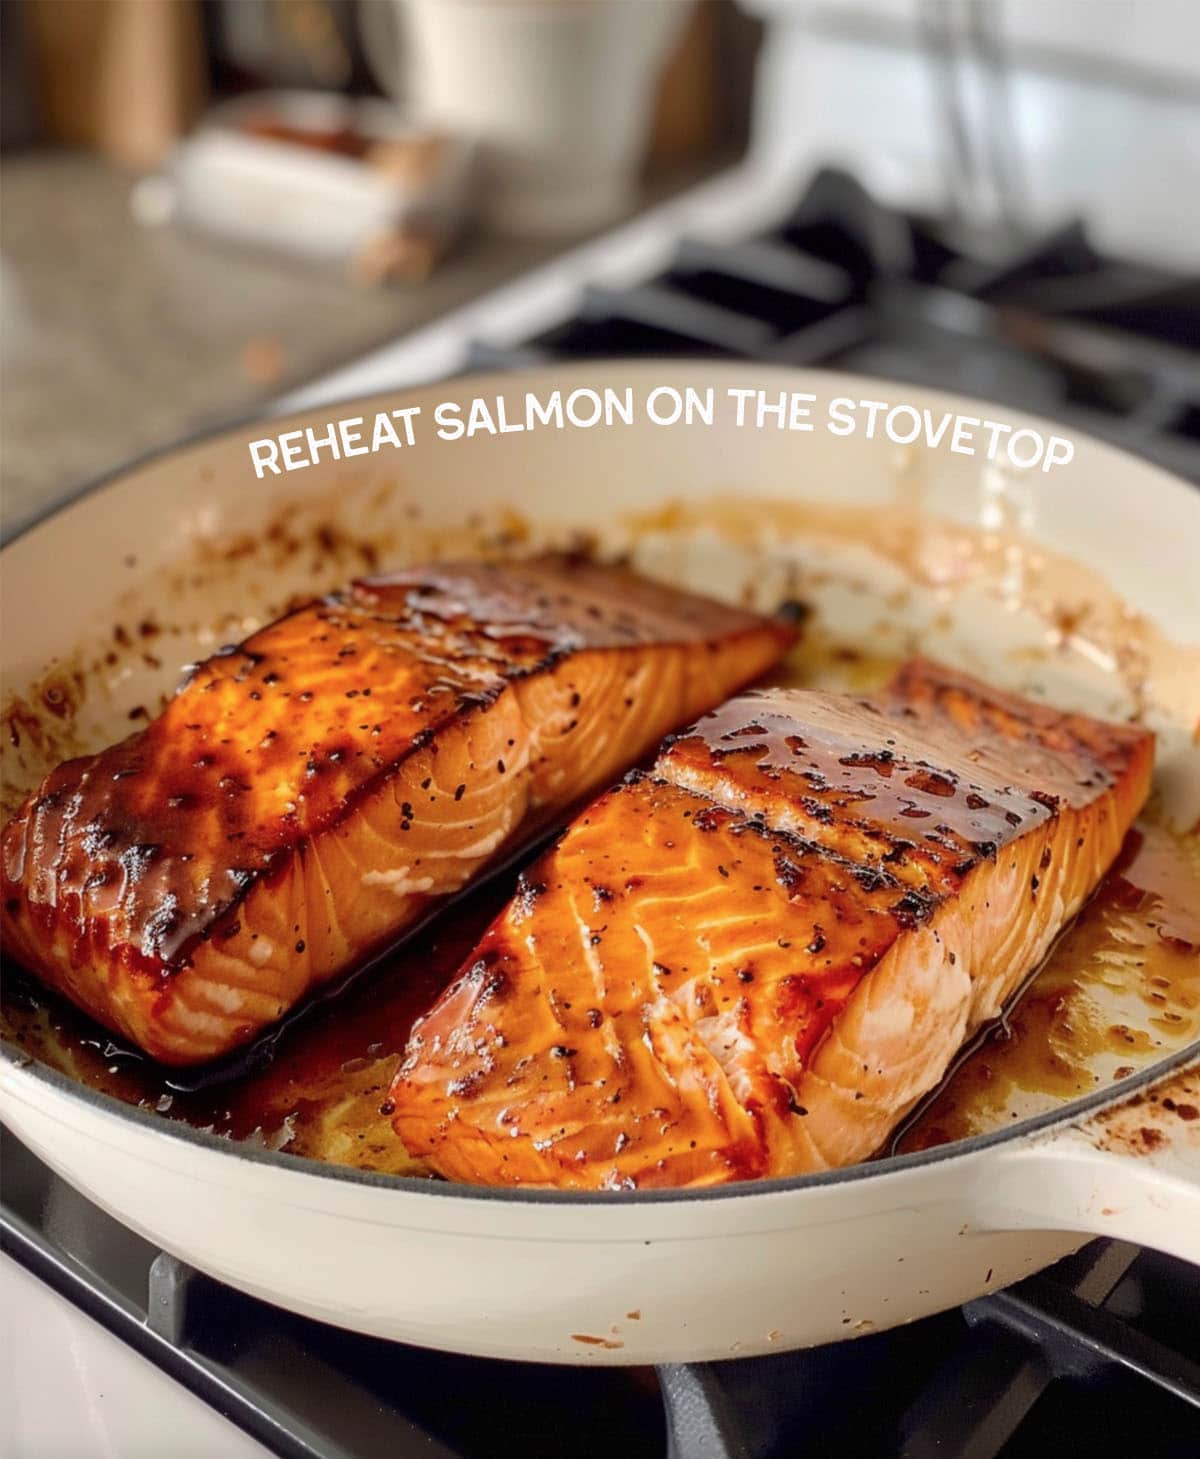 Salmon reheating in a skillet on a stovetop.